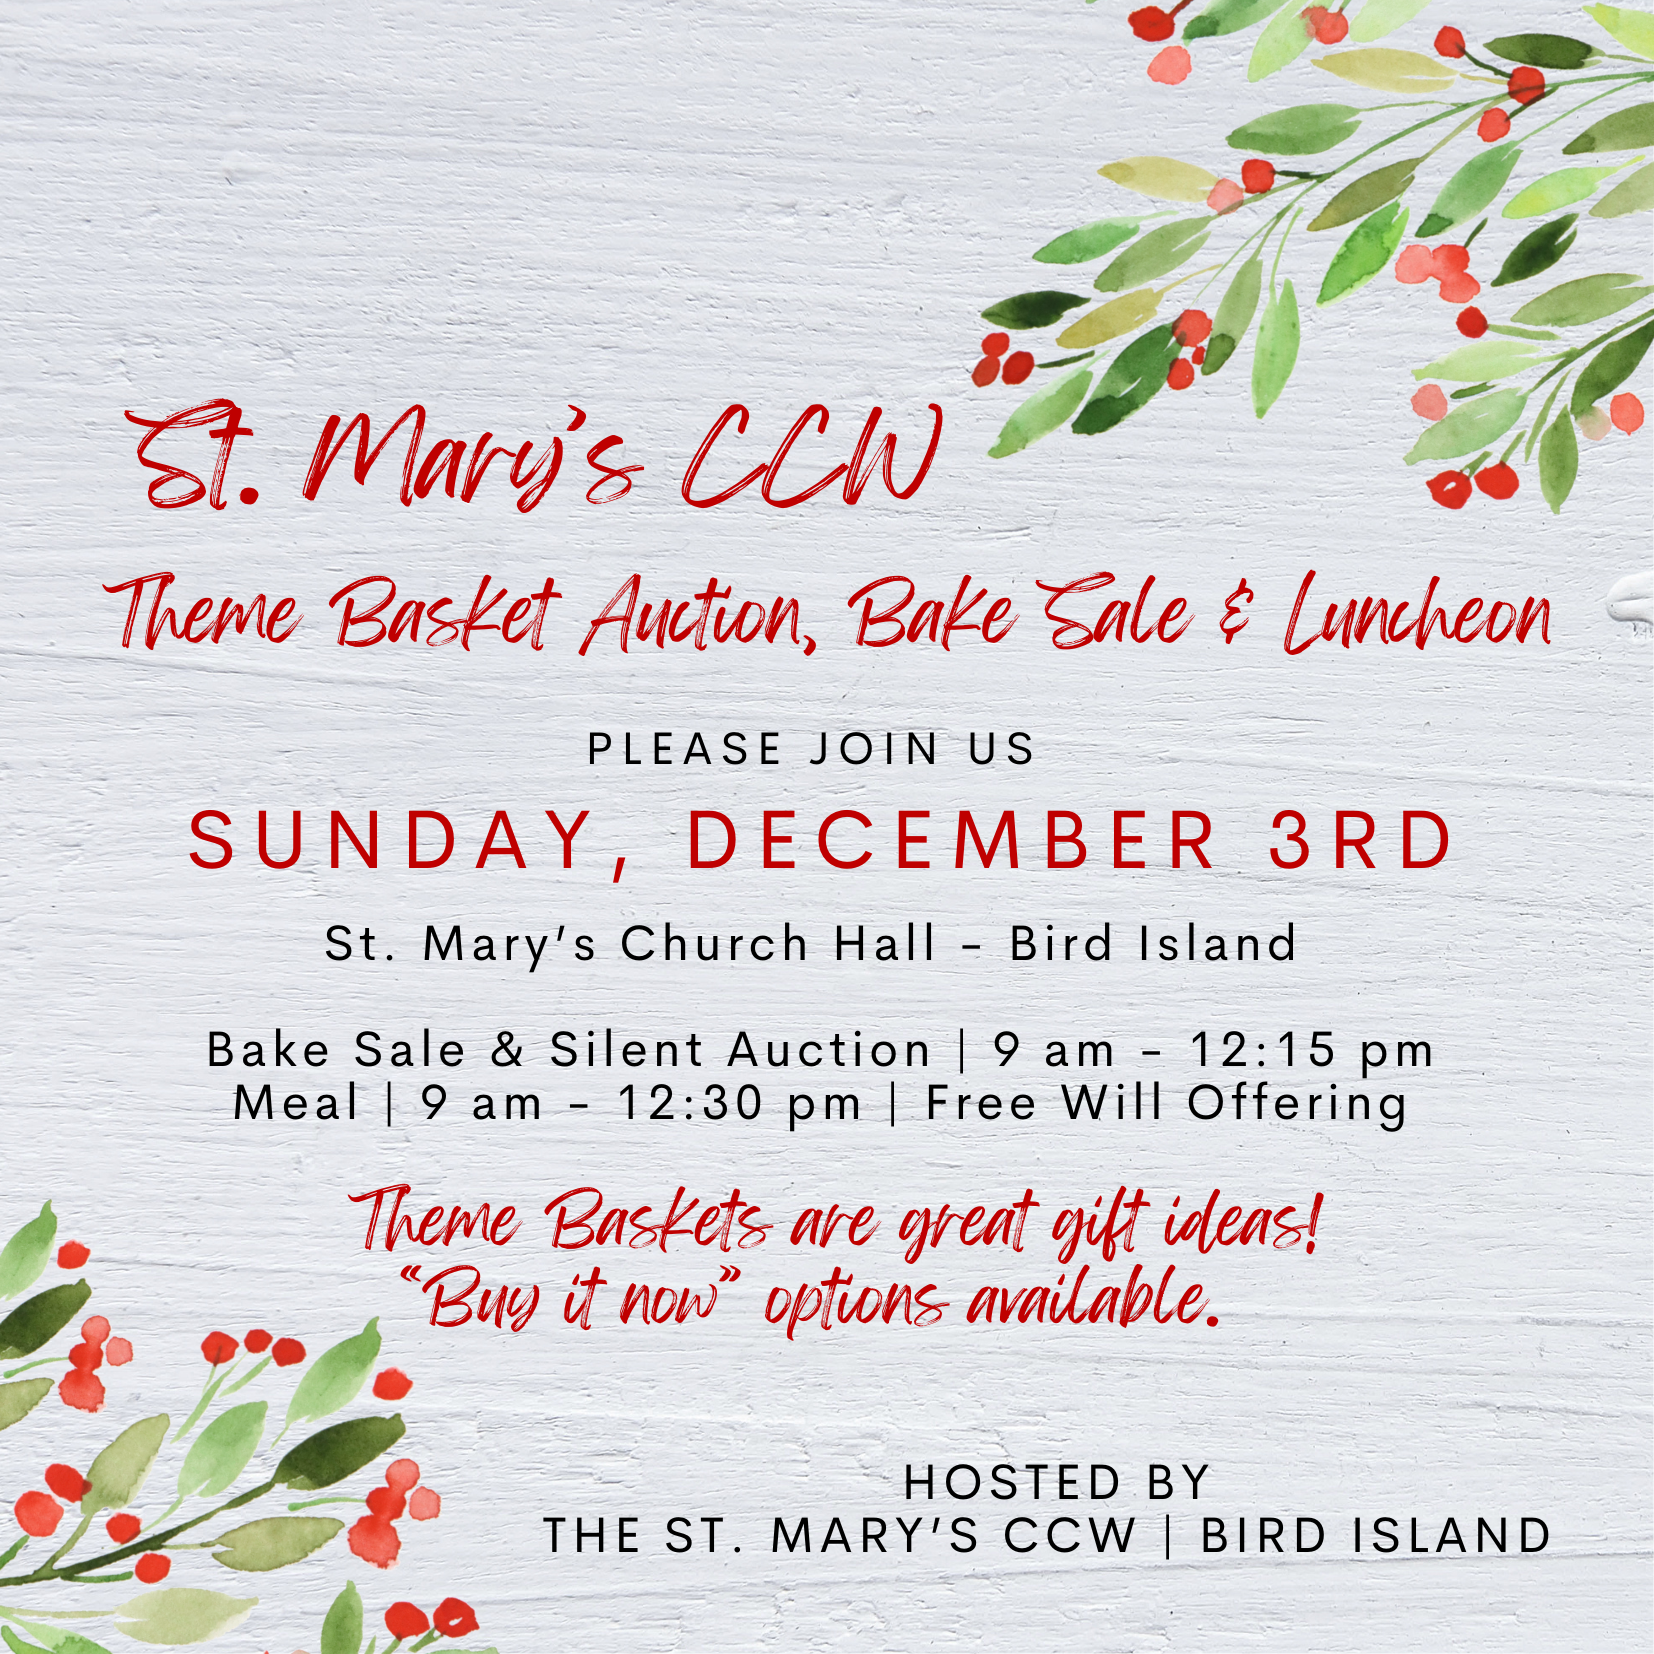 <h1 class="tribe-events-single-event-title">St. Mary’s CCW Theme Basket Auction, Bake Sale & Luncheon</h1>